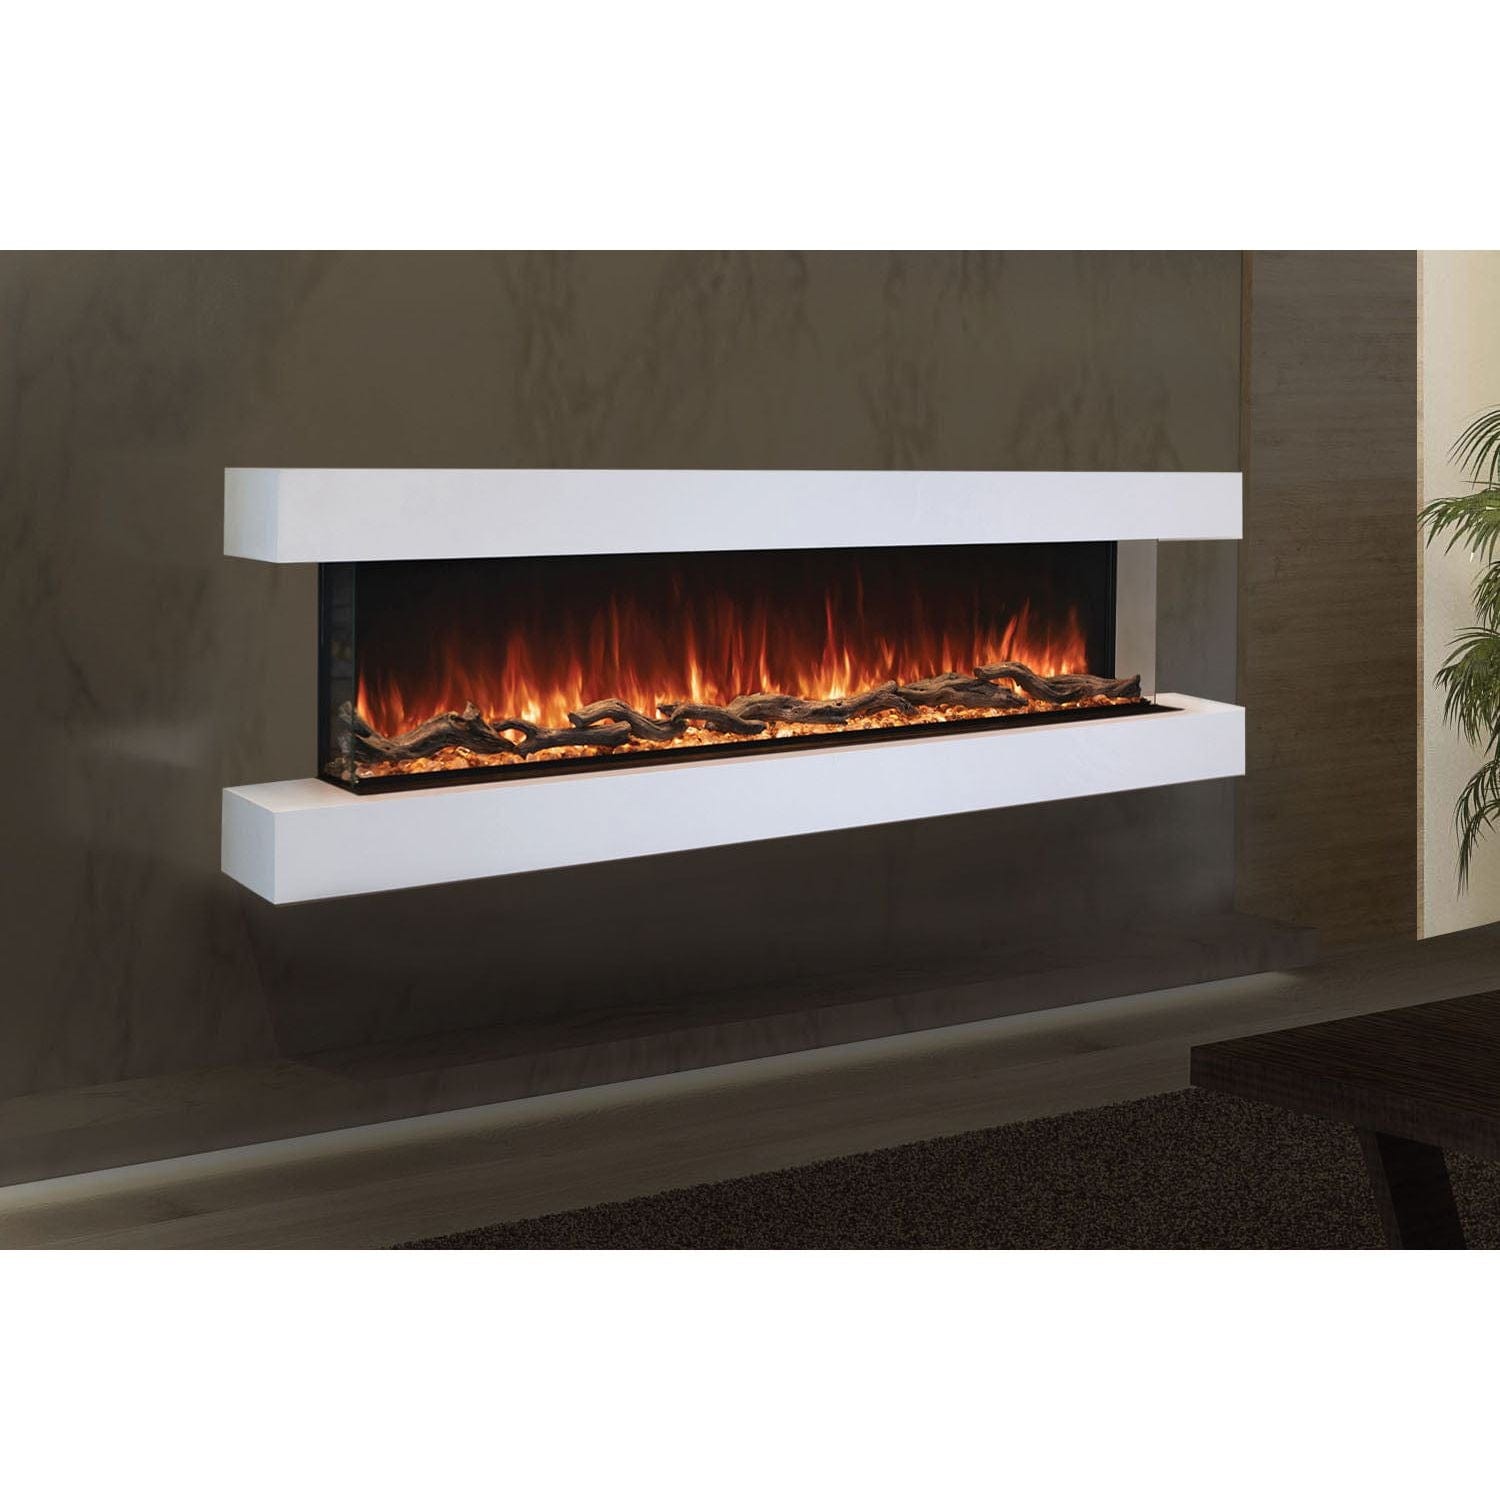 Modern Flames Modern Flames Landscape Pro 94'' Electric Fireplace Wall Mount Studio Suite | White Ready to Paint Multi-Side View Electric Fireplace Remote Control (included) LPM-8016 / WMC-80LPM-RTF